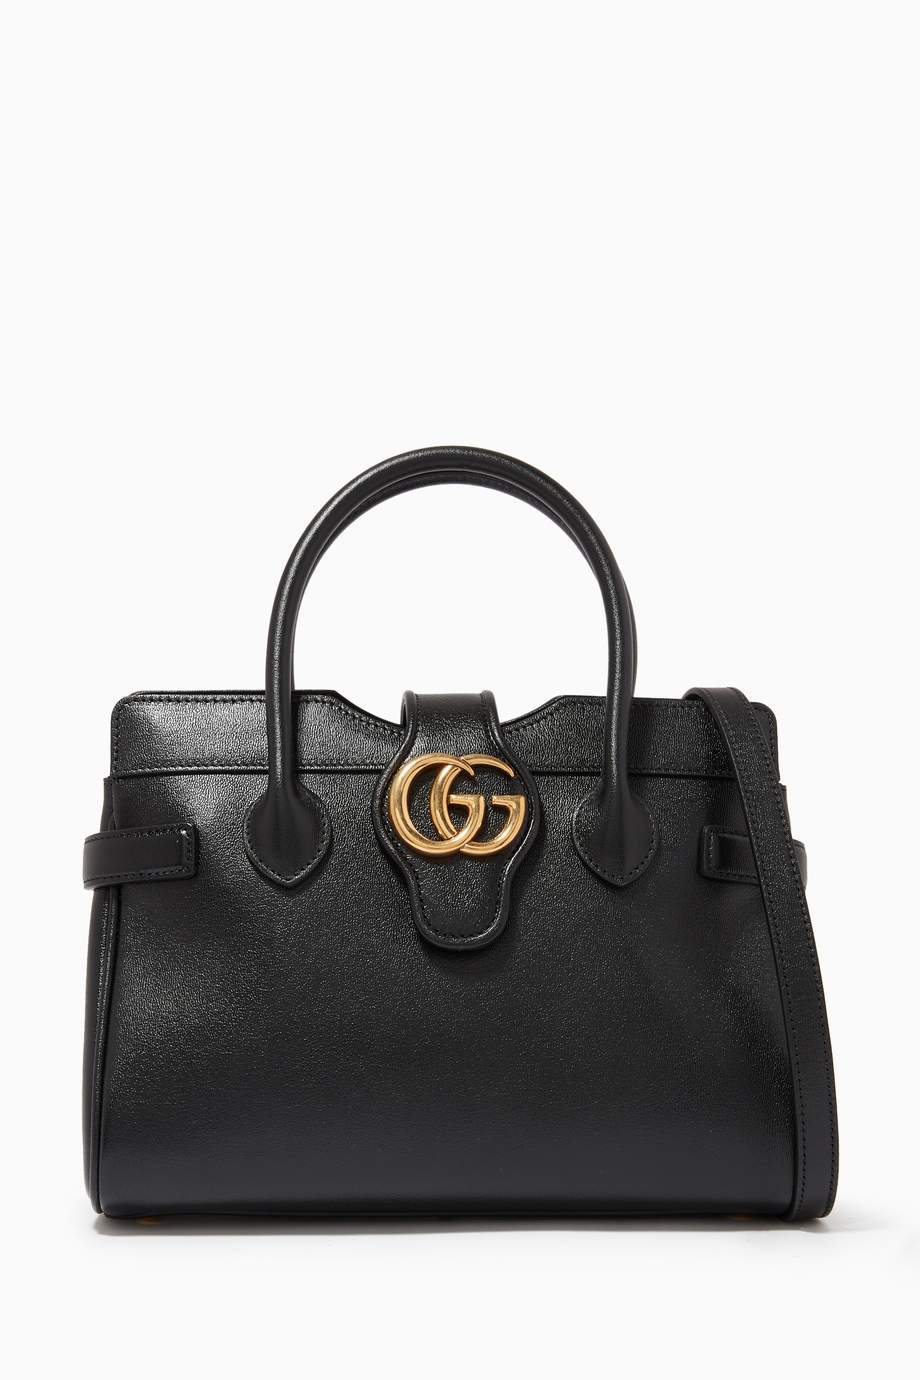 Shop Gucci Black Small Dahlia Top Handle Bag with Double G in Leather for Women | Ounass UAE